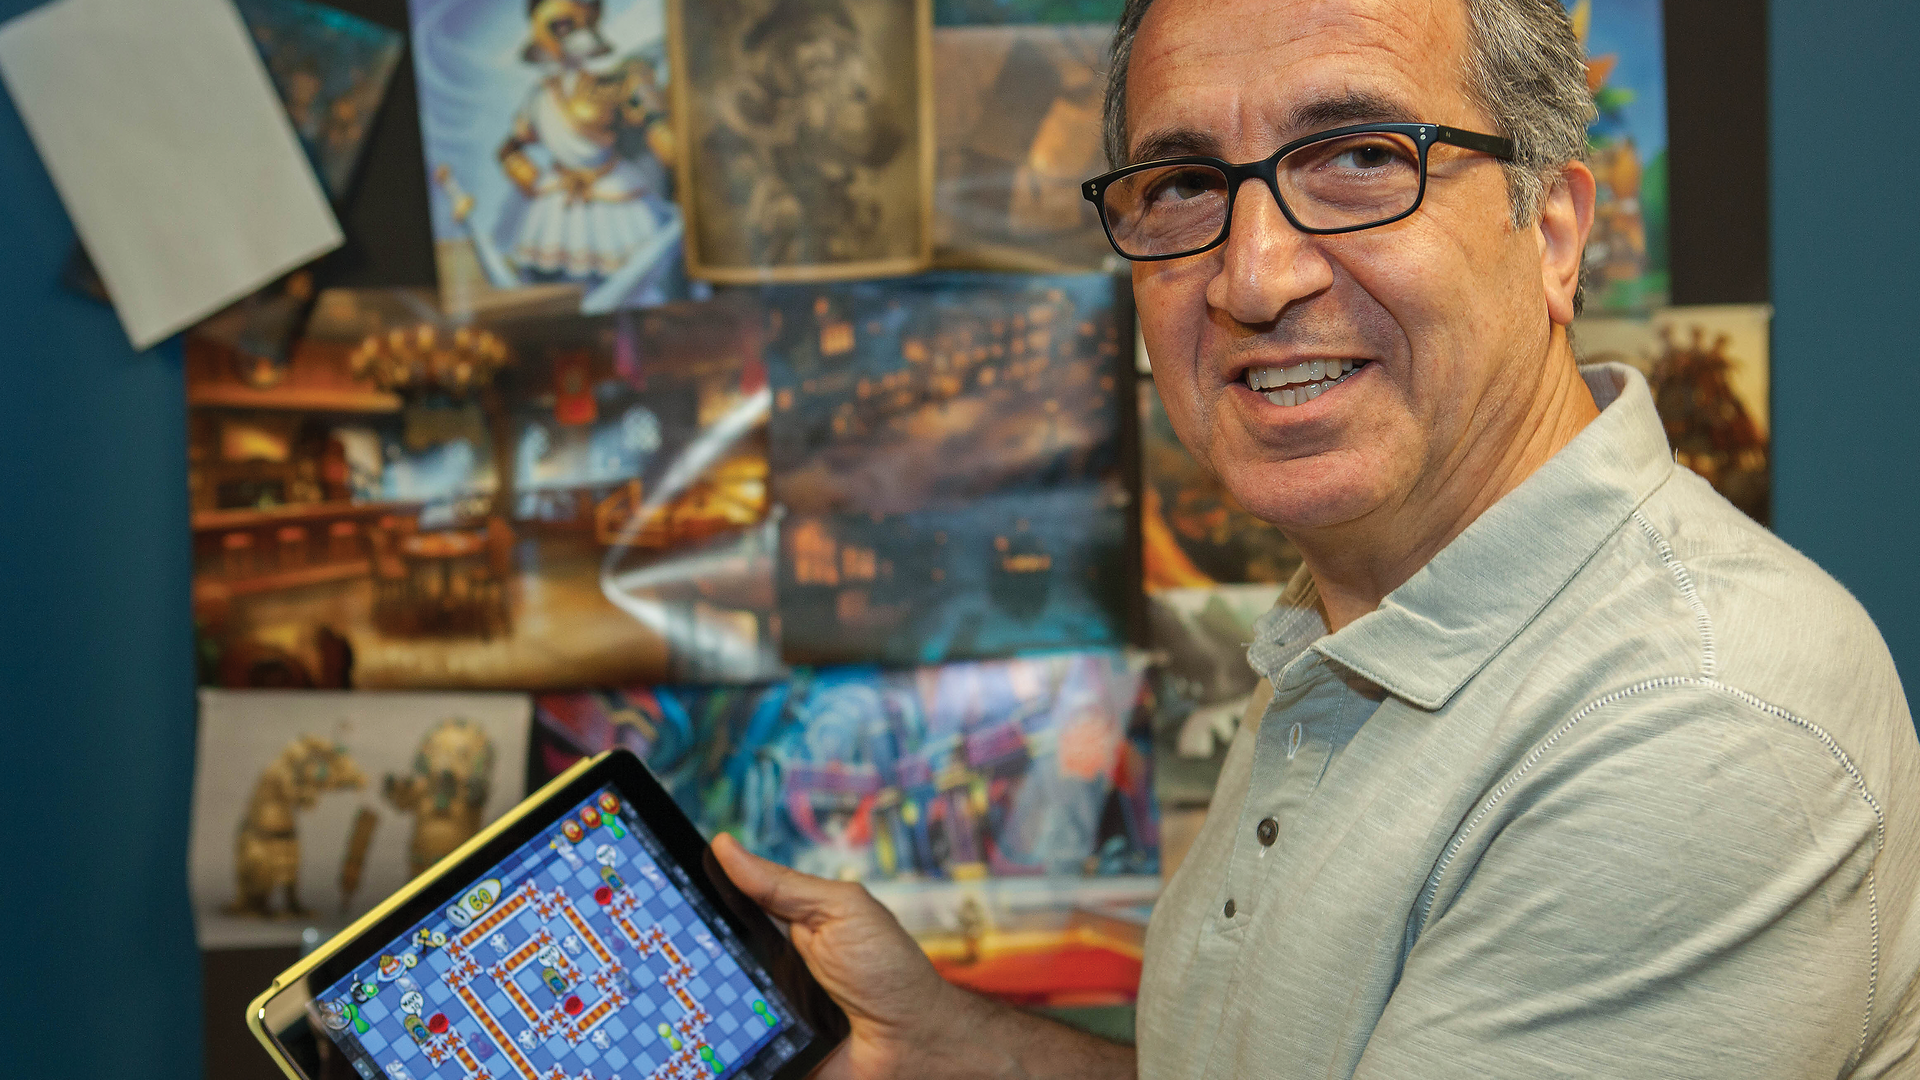 A man with glasses staring at the camera, showing the game he developed on a tablet in his hand.